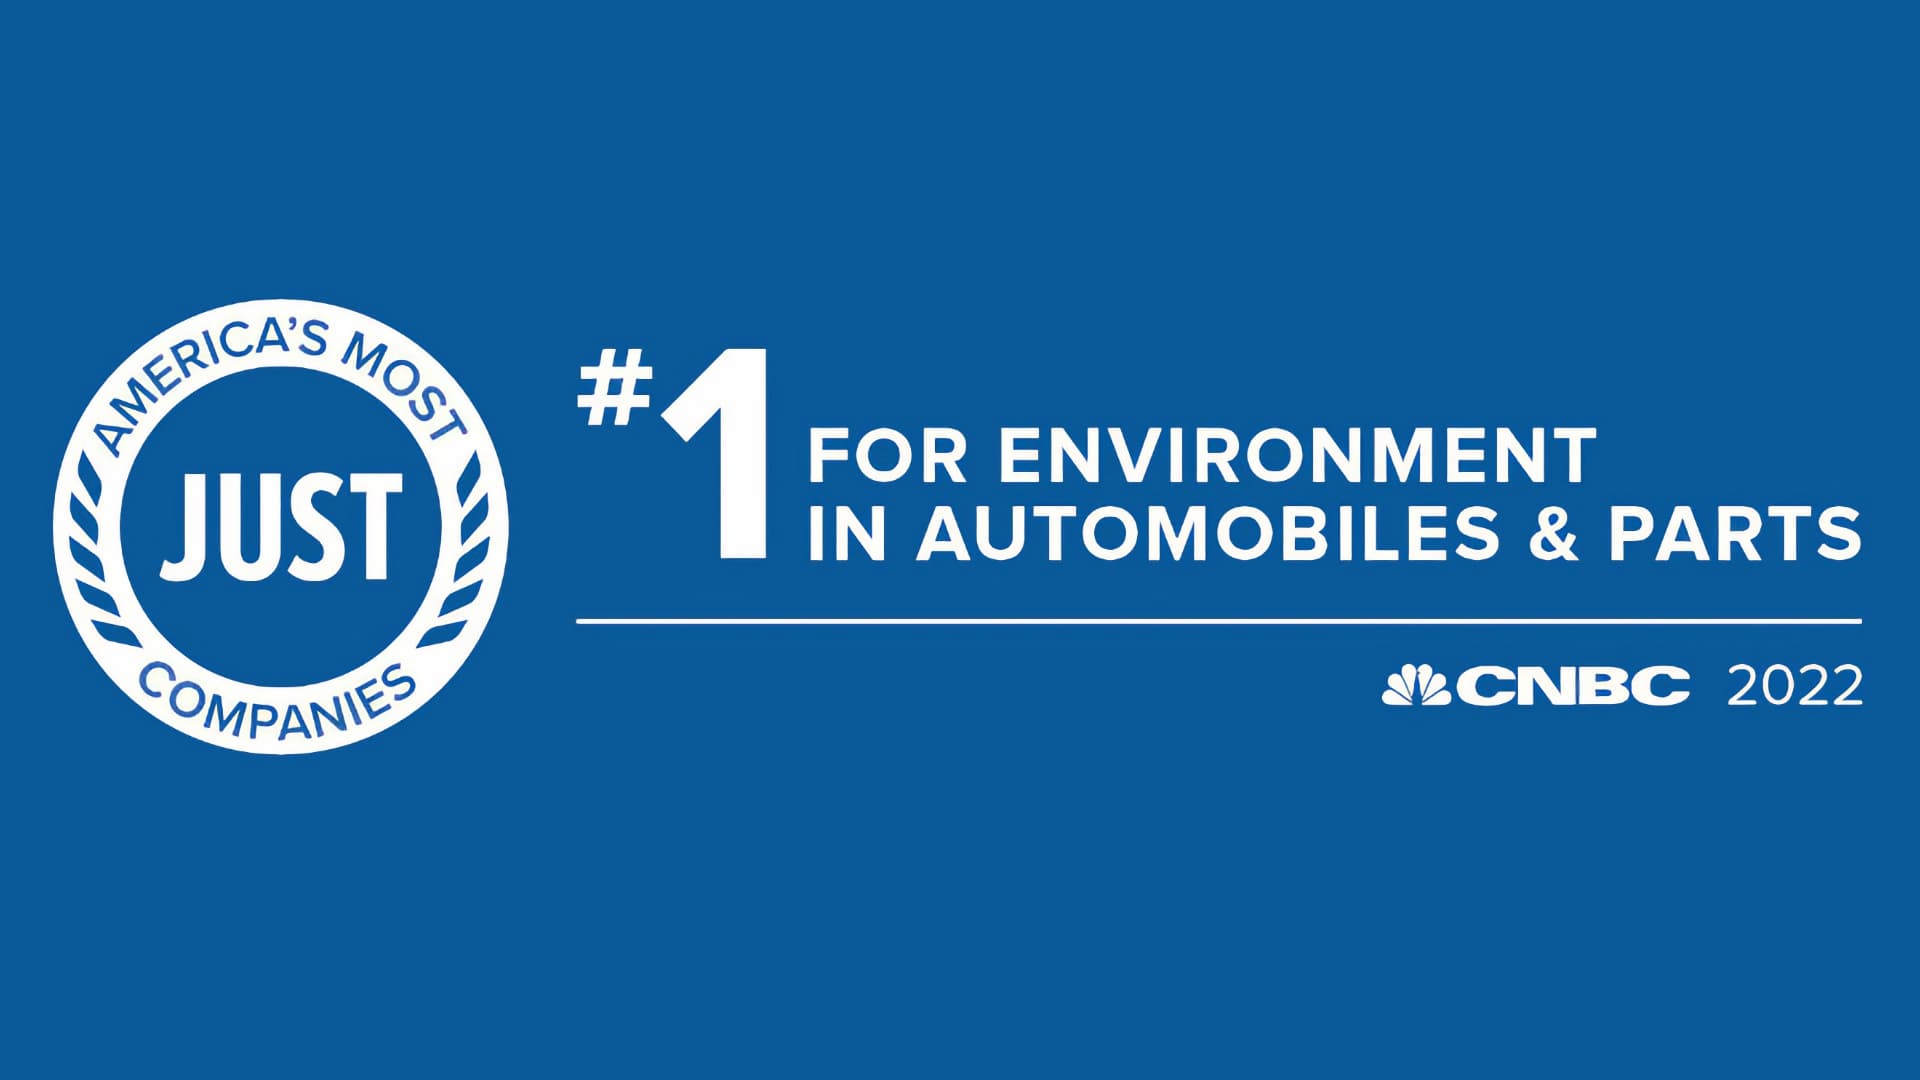 Ford Named Industry Leader For Environmental Performance In 2022